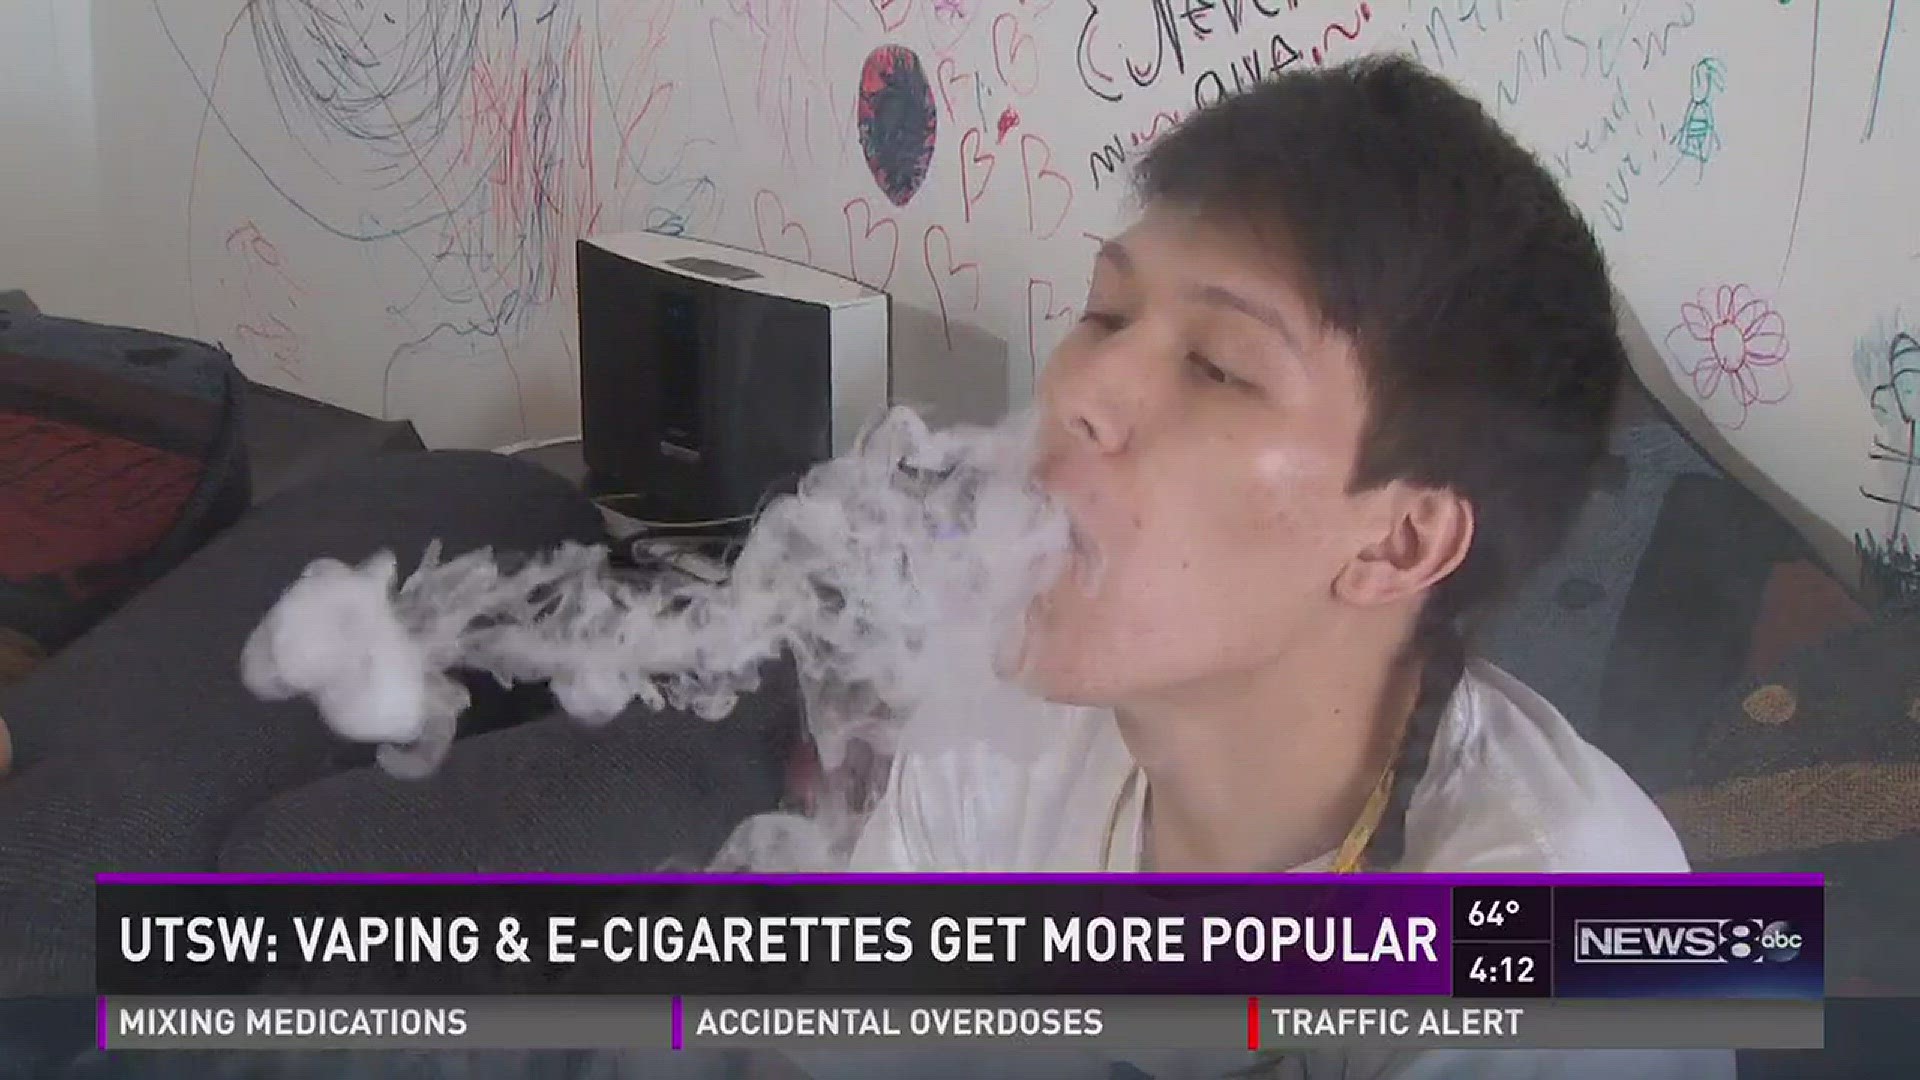 We all know cigarettes are bad for your health. But now alternatives like e-cigarettes and vaping are getting even more popular... especially with teens.